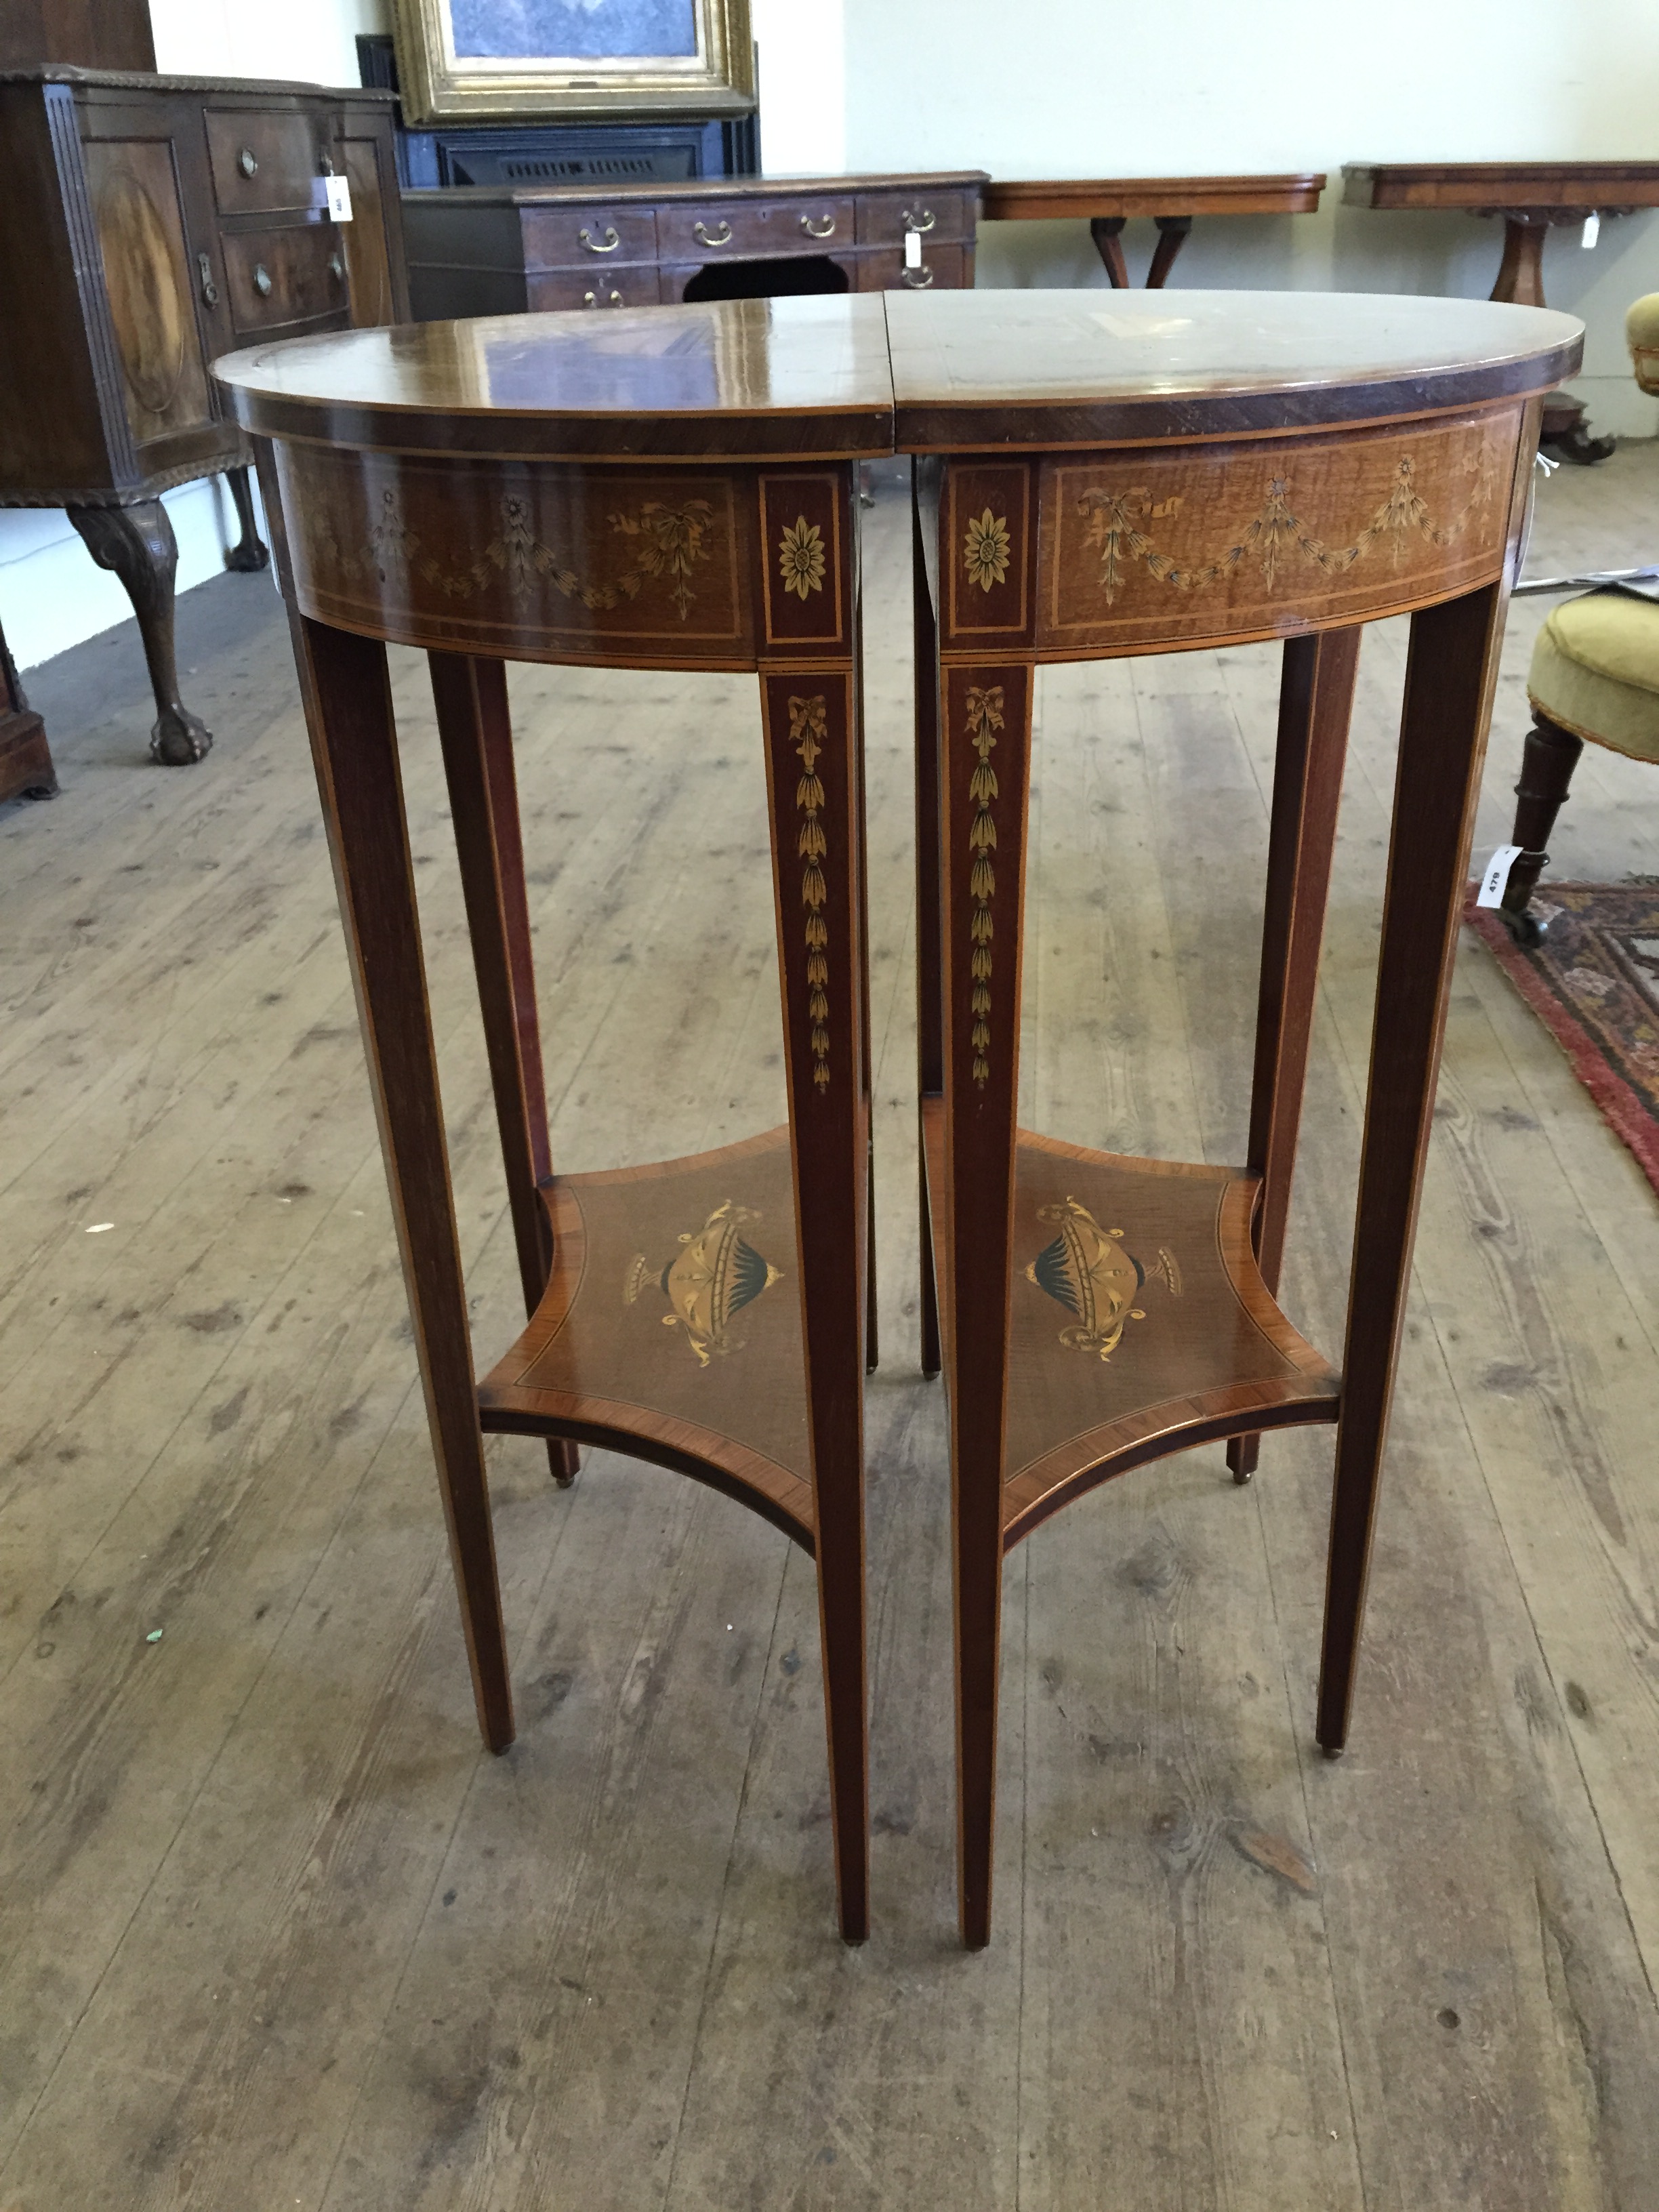 A pair of Edwardian demi-lune hall tables, the tops inlaid with a twin handled vase surrounded by - Image 8 of 22